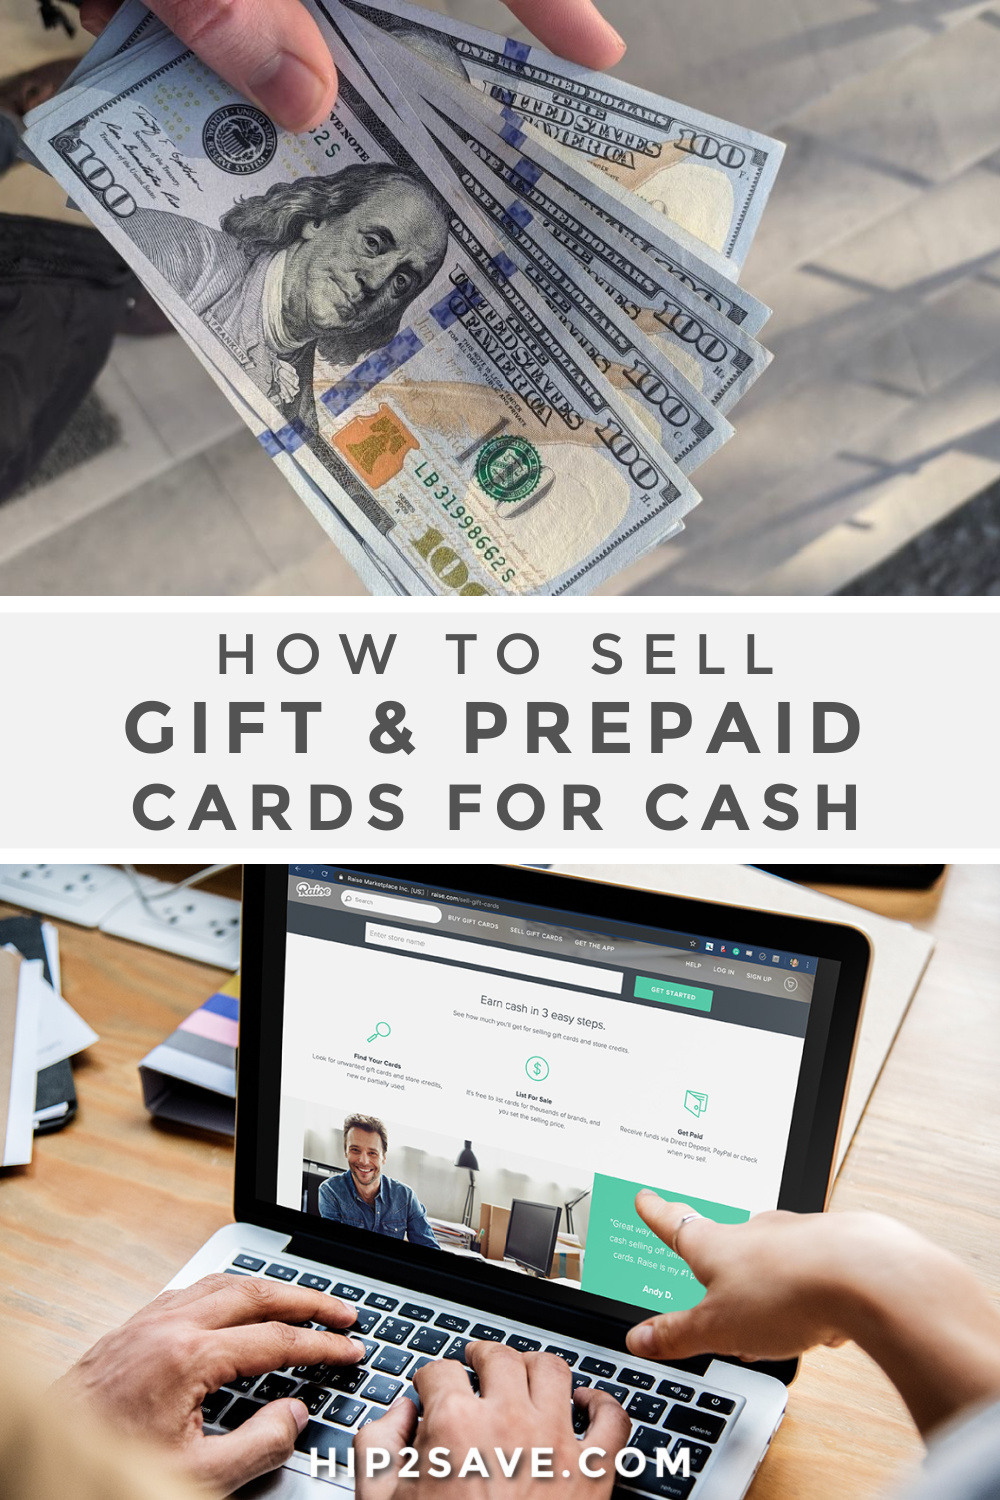 Gift cards for cash: Here's how to sell and trade them